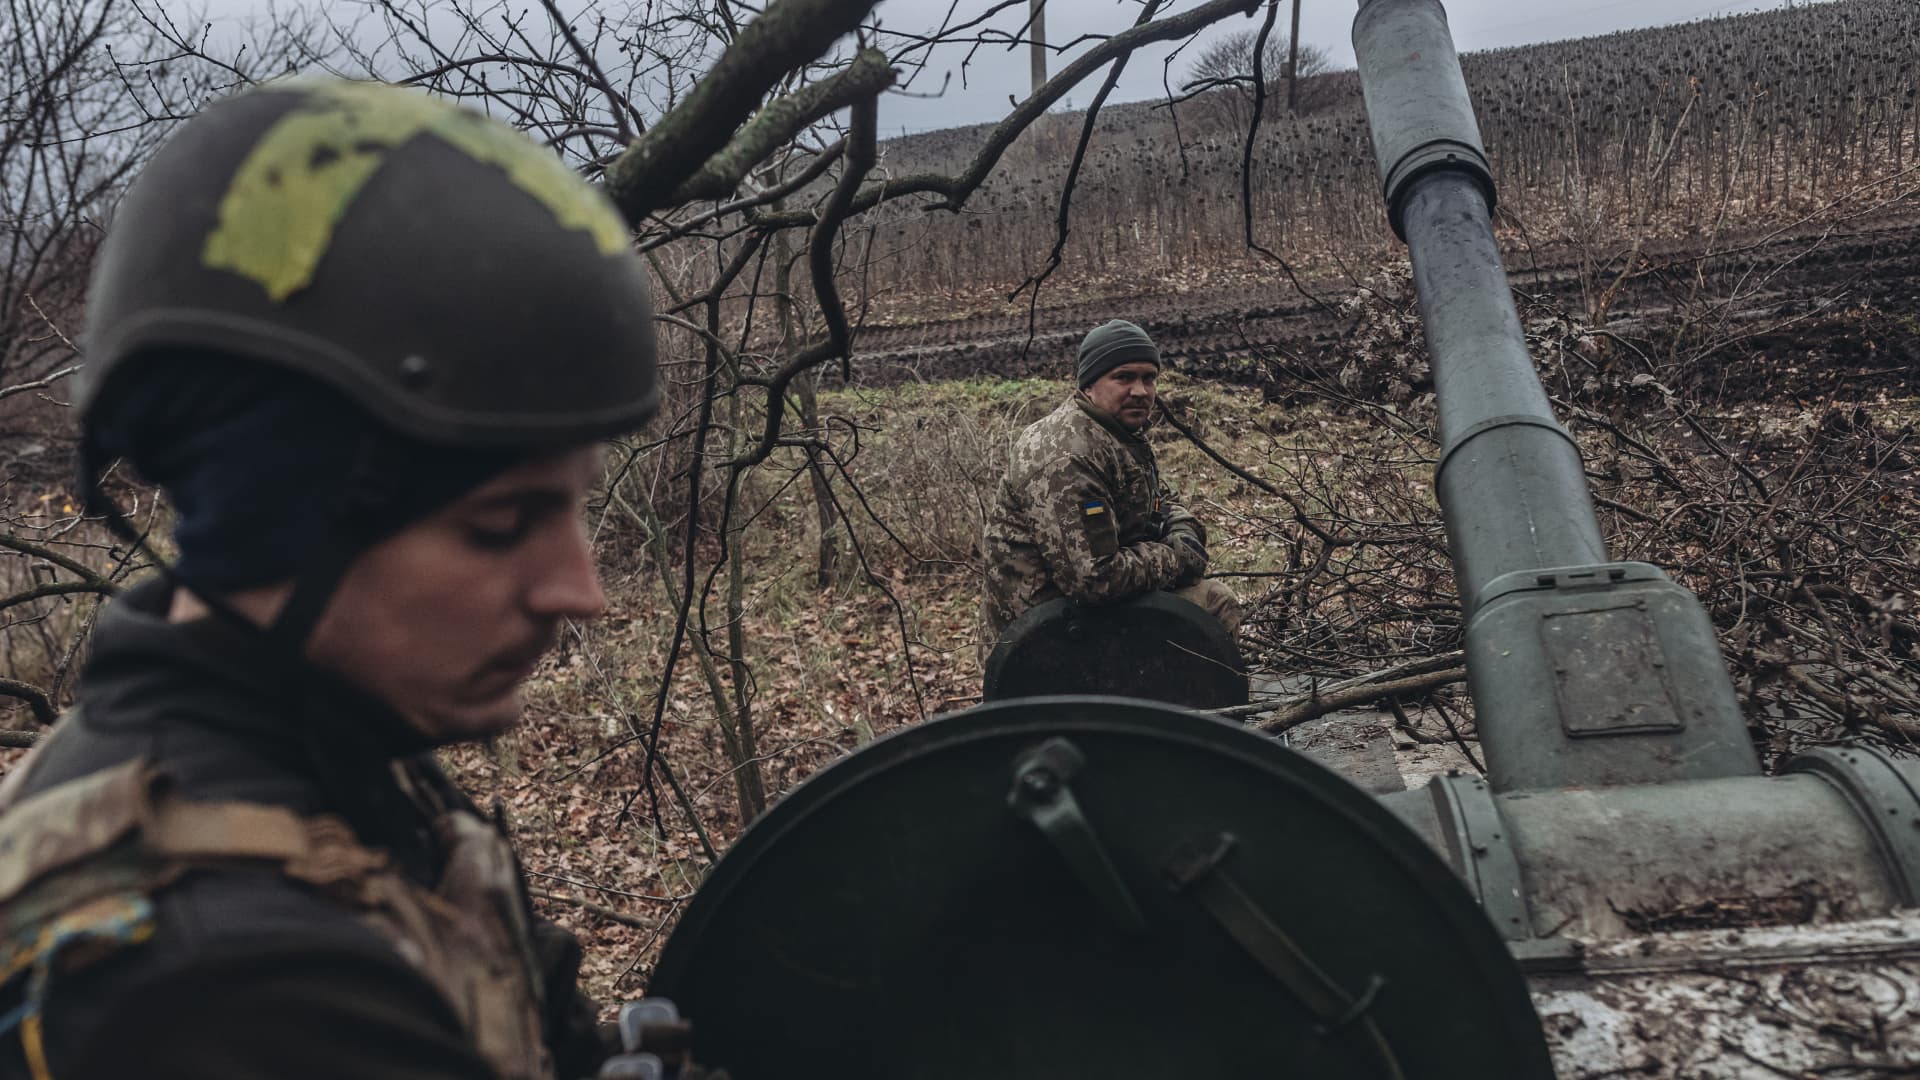 Ukrainian tankmen on the Bakhmut front line in Donetsk, Ukraine, on Nov. 27, 2022. Intense military activity around the city involves warplanes from both sides, artillery systems, tanks and other heavy weapons that are used day and night.